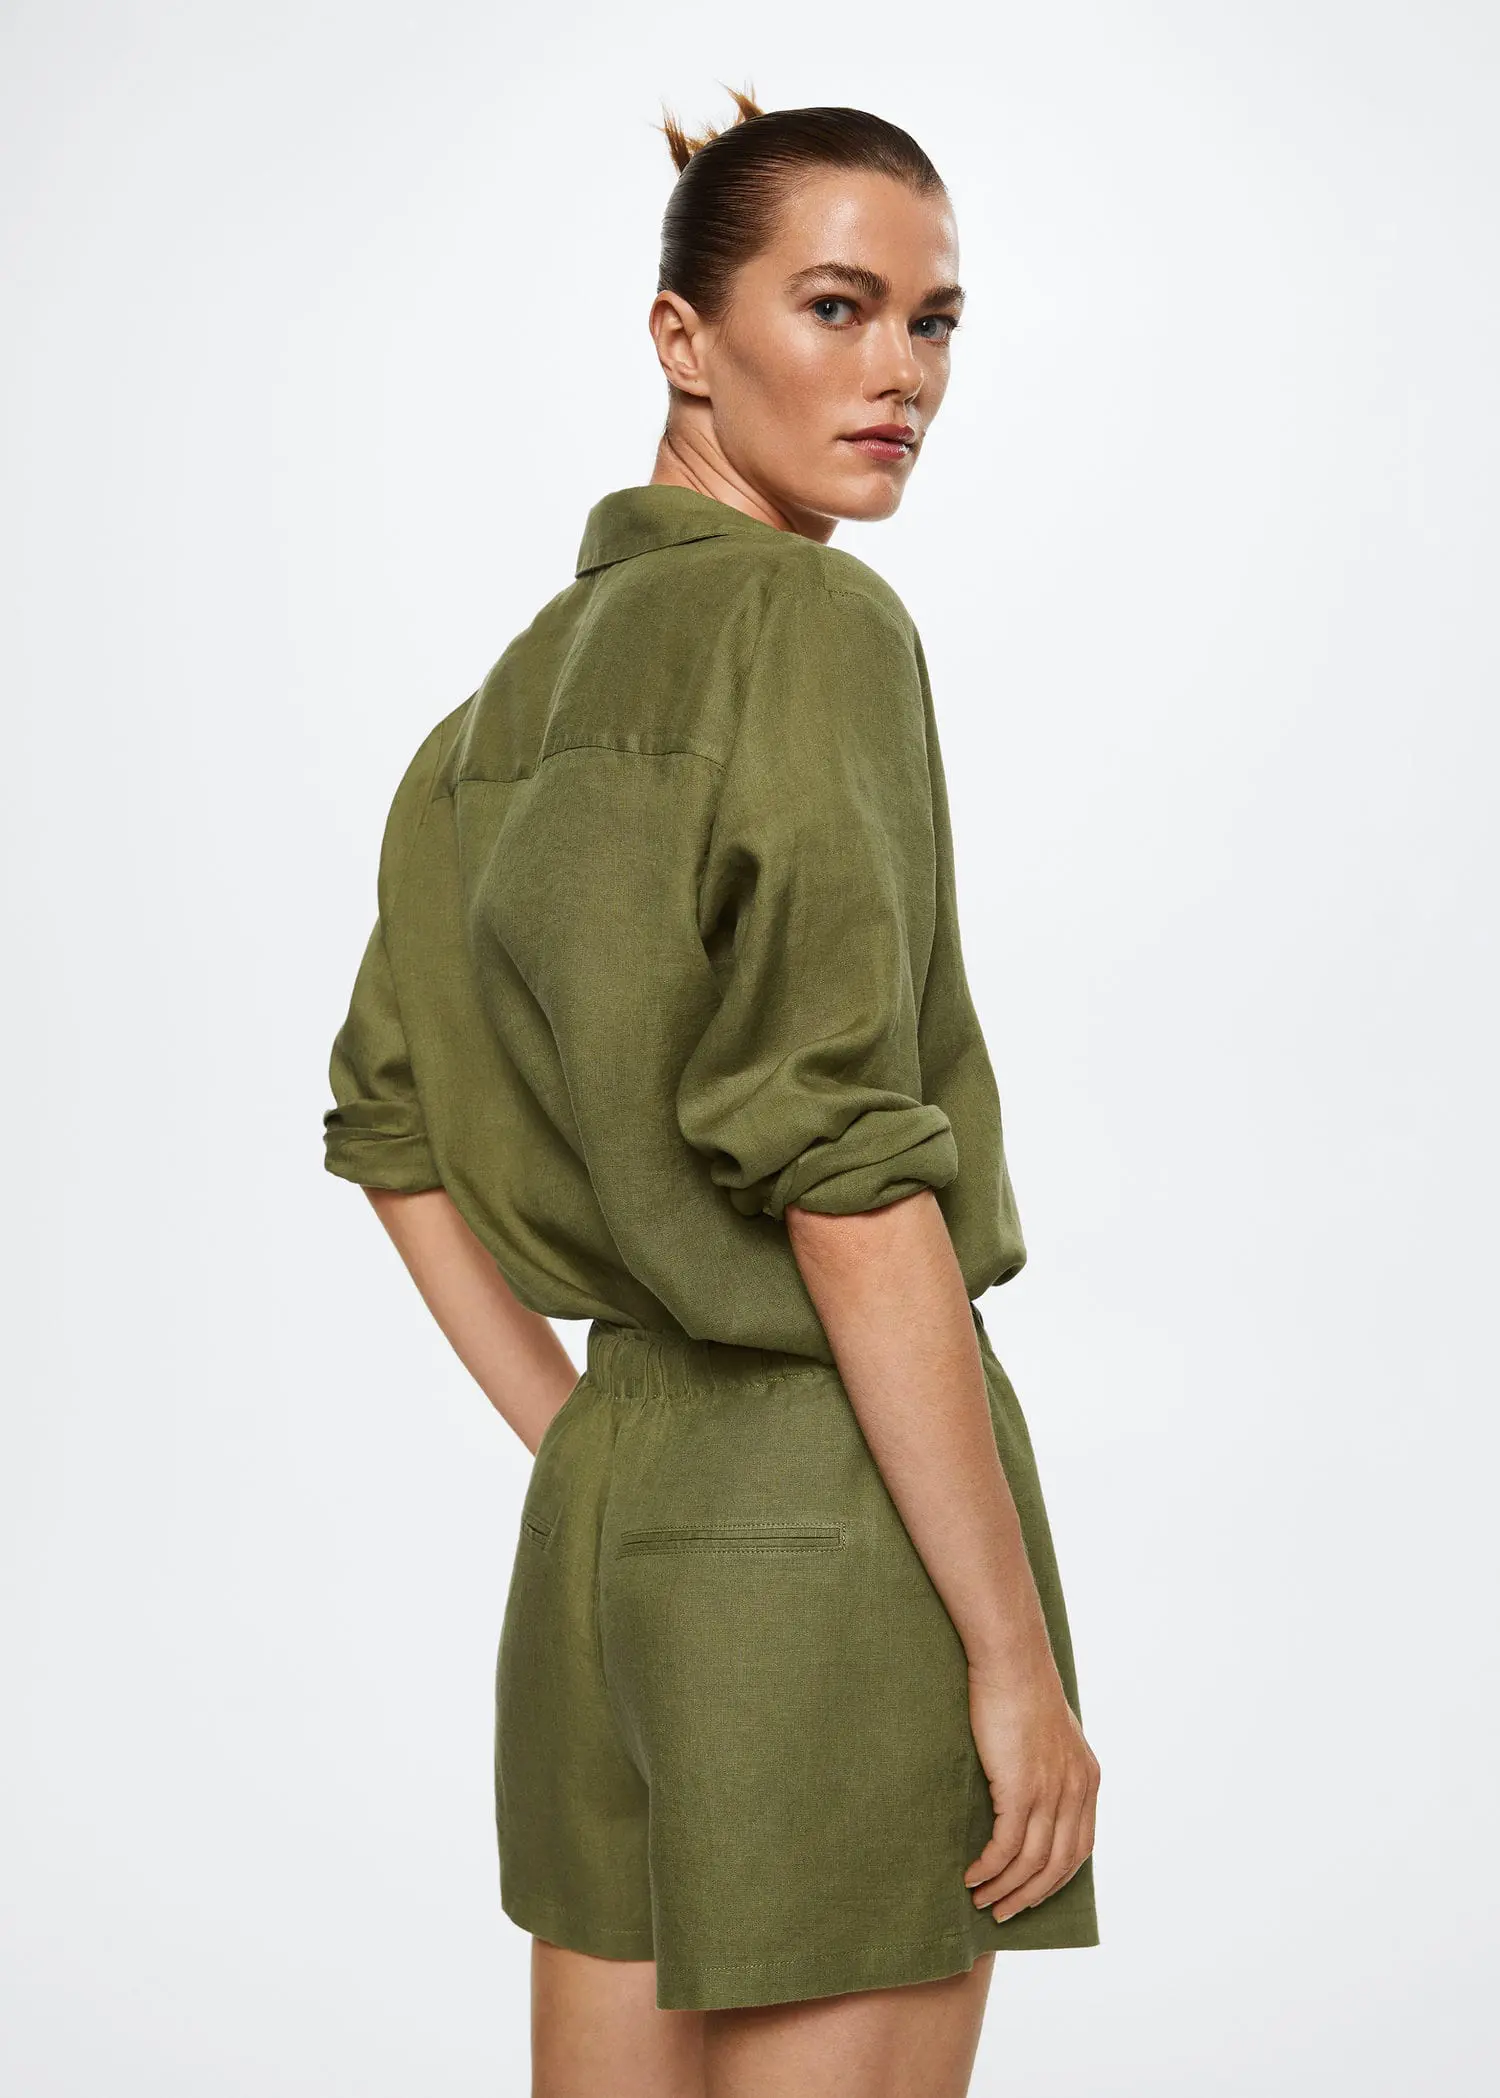 Mango 100% linen shorts. a woman in a green outfit is standing in front of a white wall. 